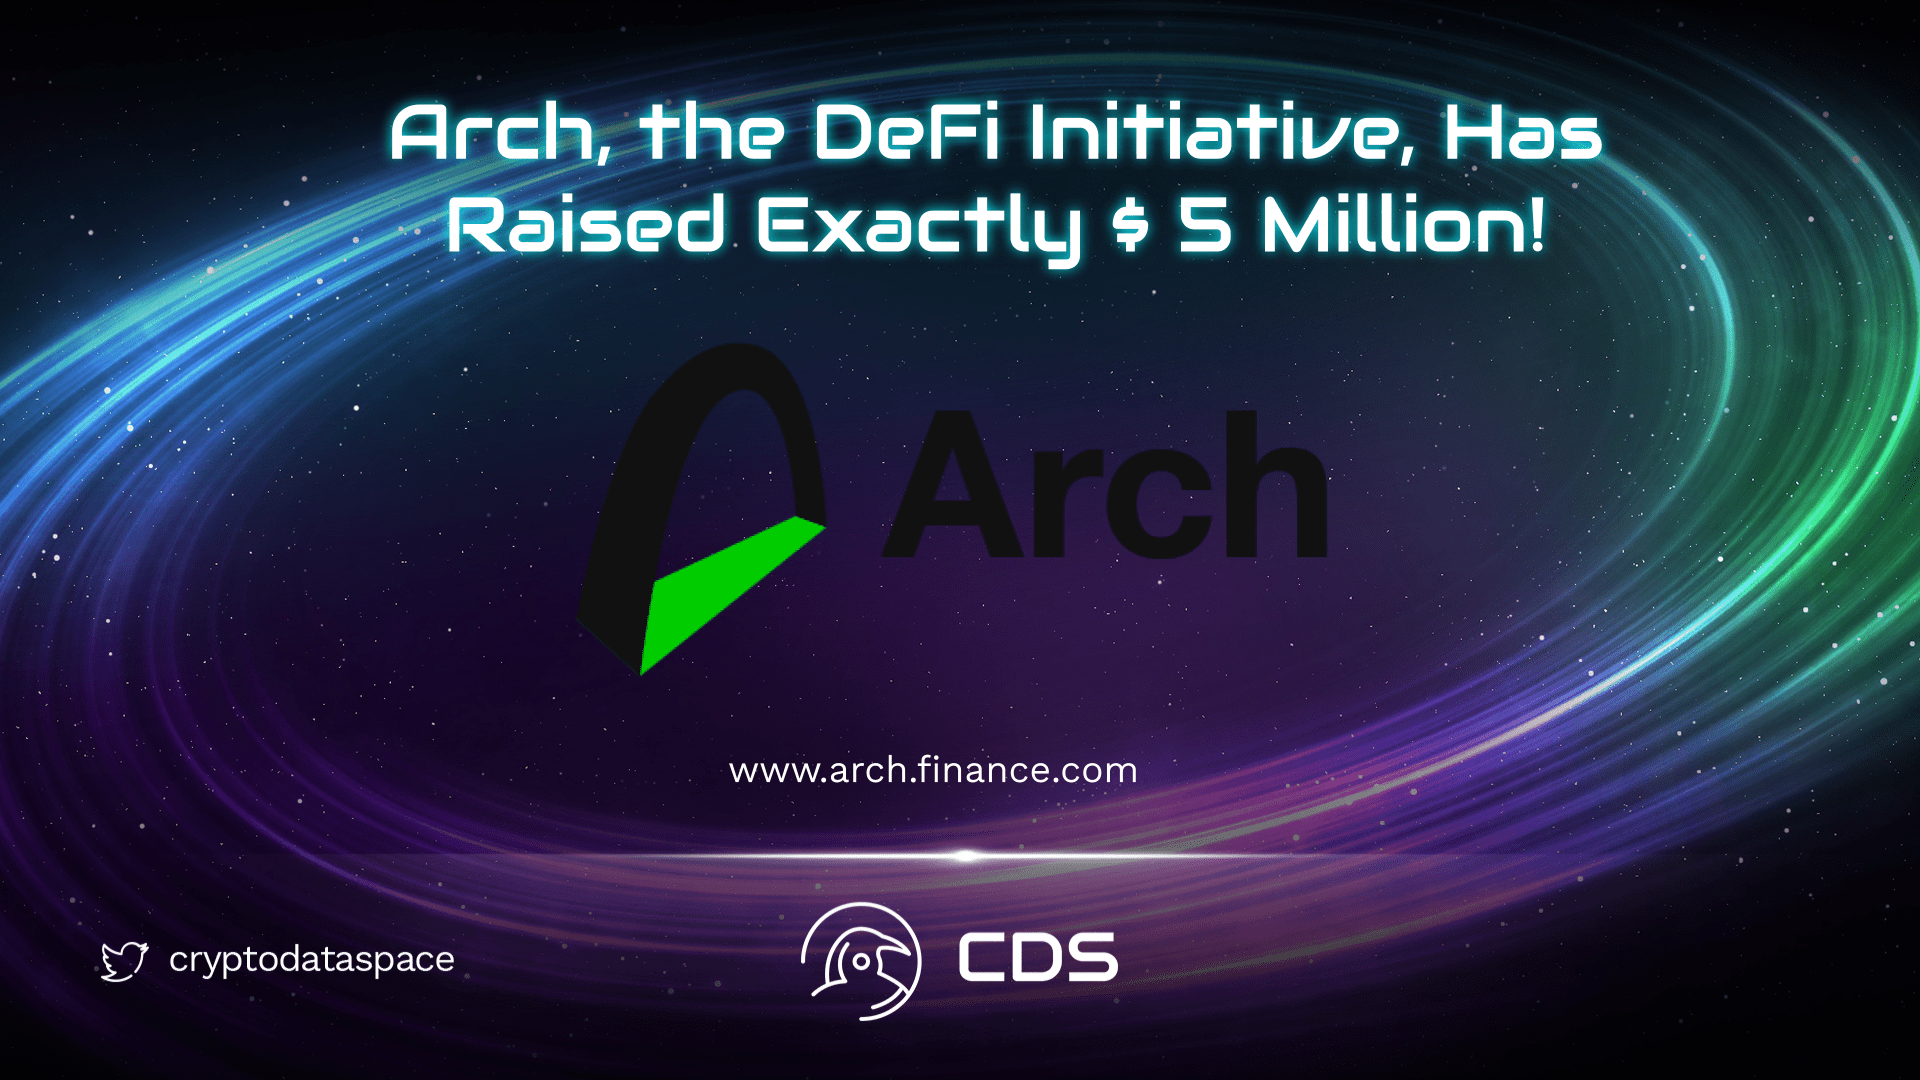 Arch, the DeFi Initiative, Has Raised Exactly $ 5 Million!